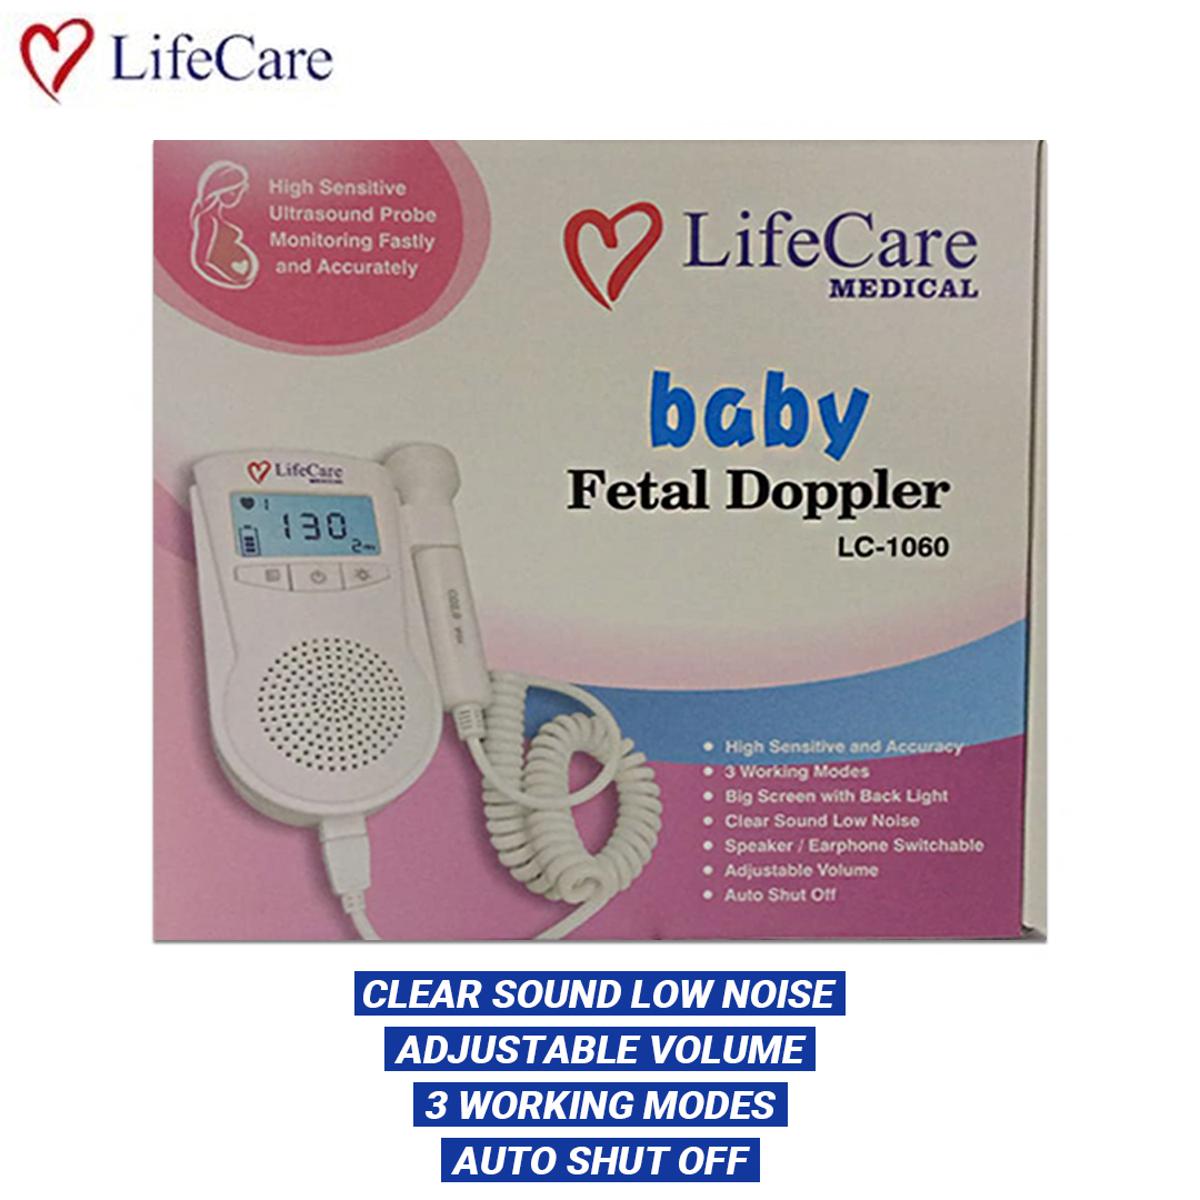 Lifecare Baby Fetal Doppler Monitoring Fastly and Accurately